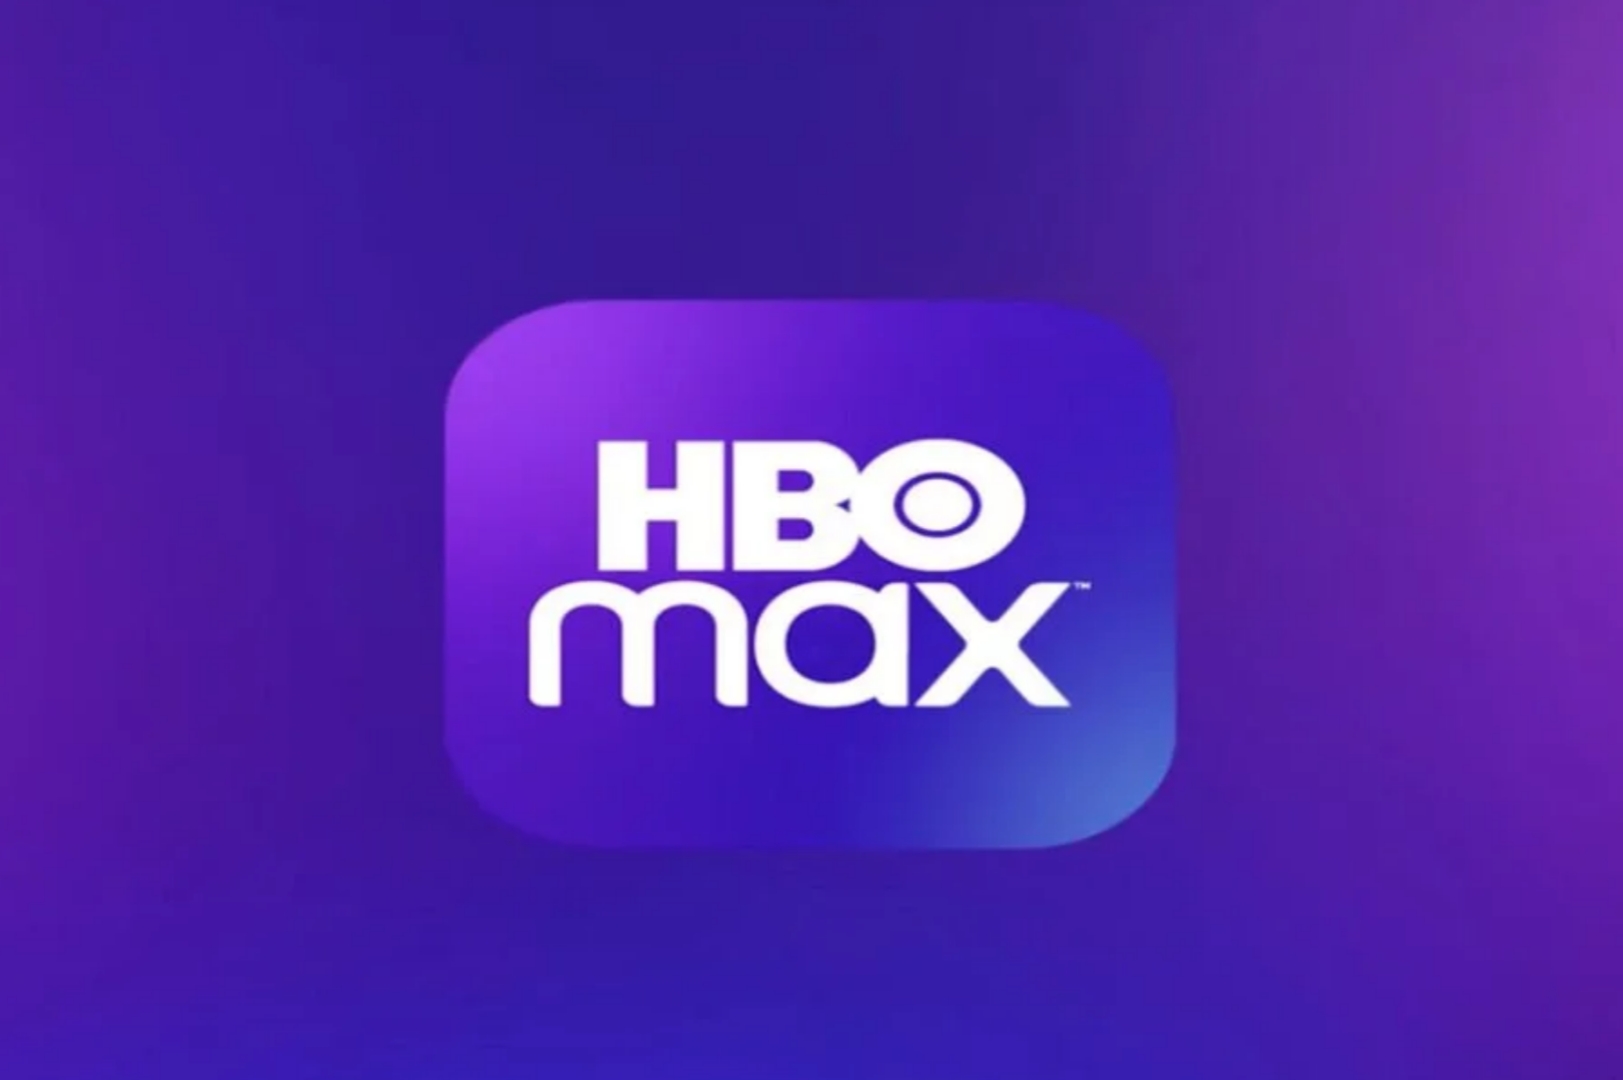 HBO max student discount